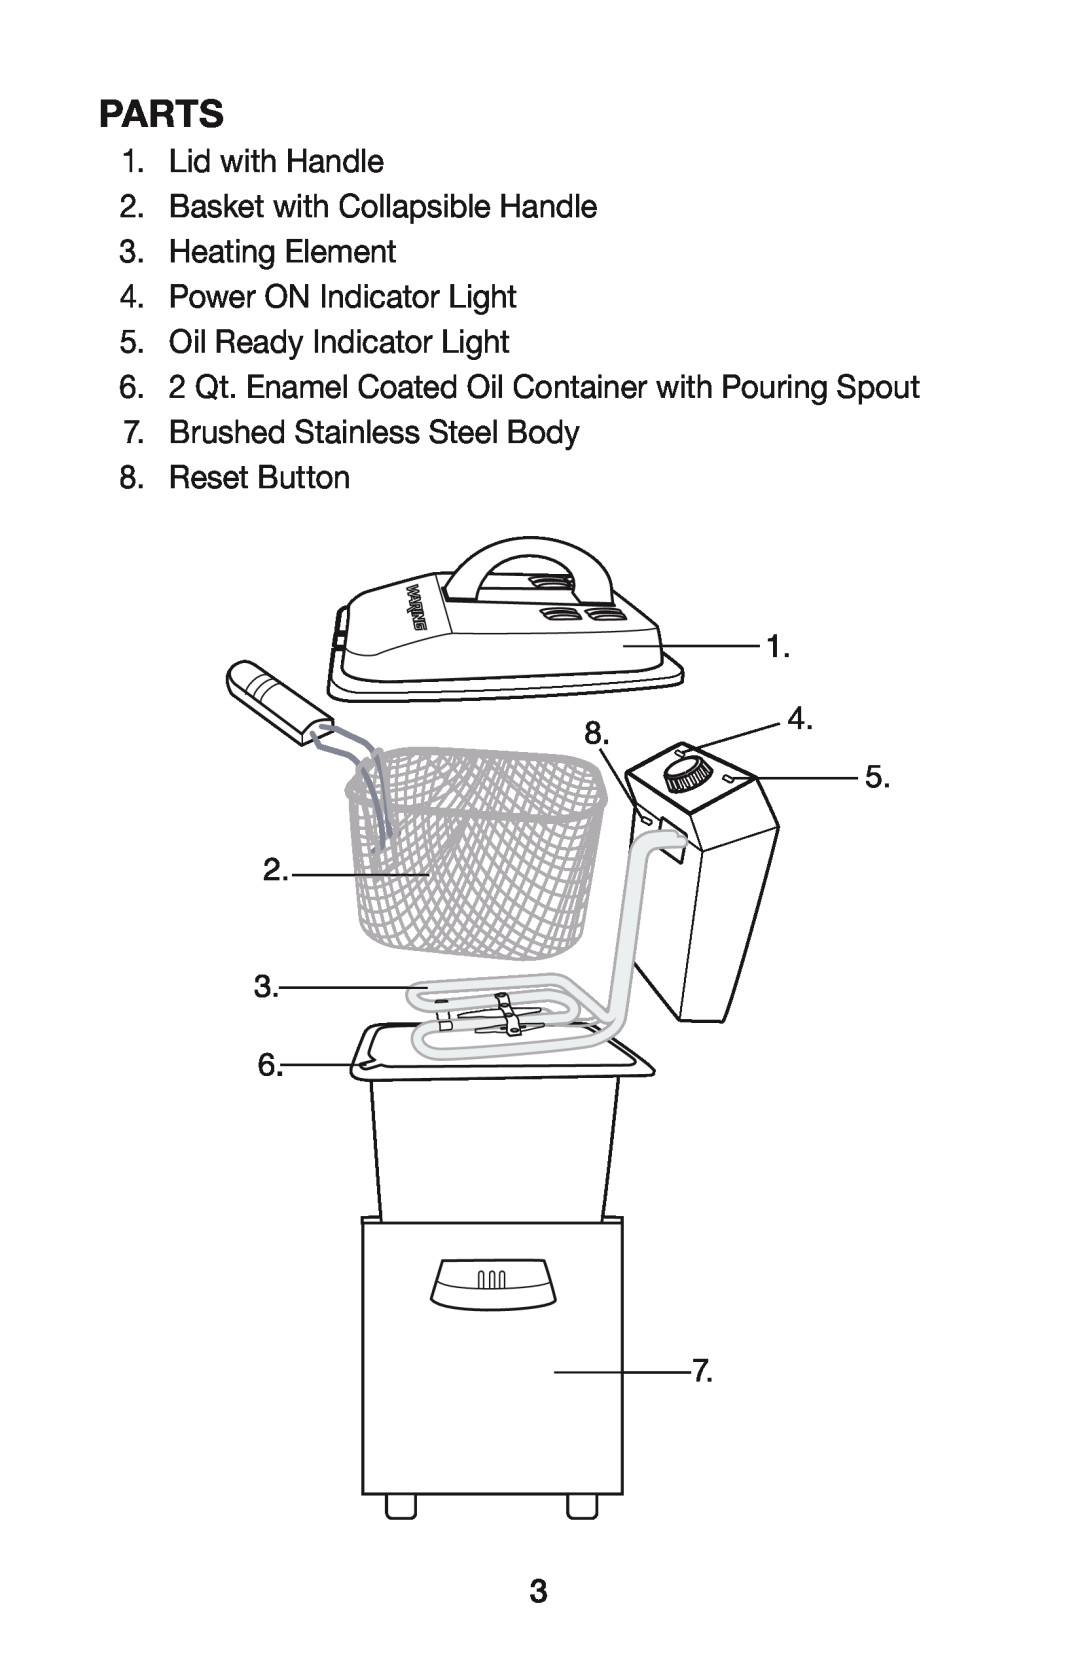 Waring DF55 manual Parts, Lid with Handle, Basket with Collapsible Handle, Heating Element 4.Power ON Indicator Light 